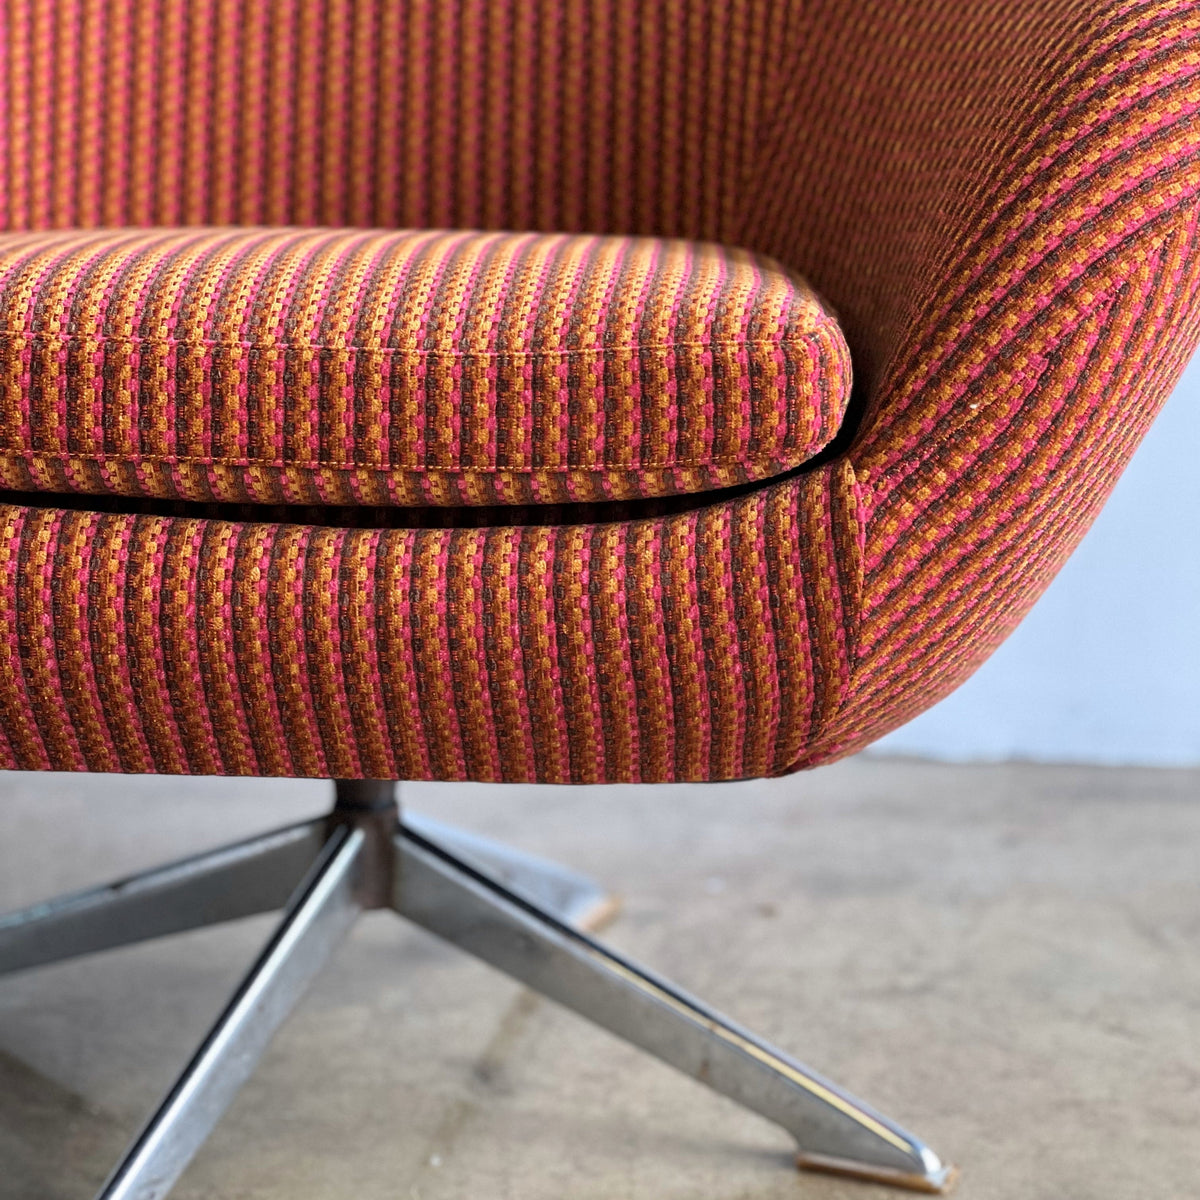 Rainbow Striped Swivel Chair - The Finishing Store South Africa